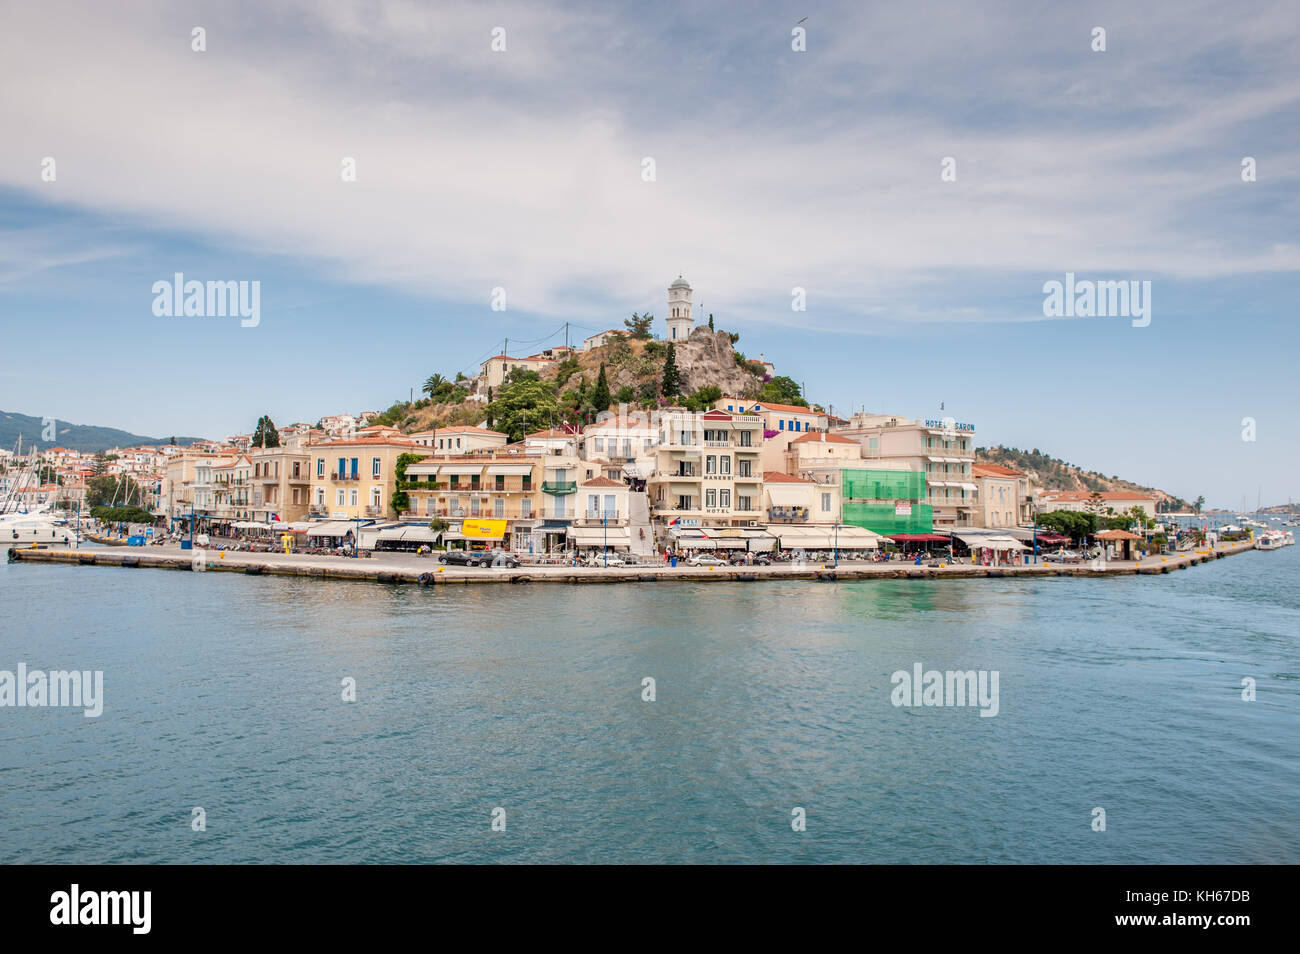 Poros viewd from a ferry. Poros is a small Greek island in the Aegean sea belonging to the Saronic islands. Stock Photo